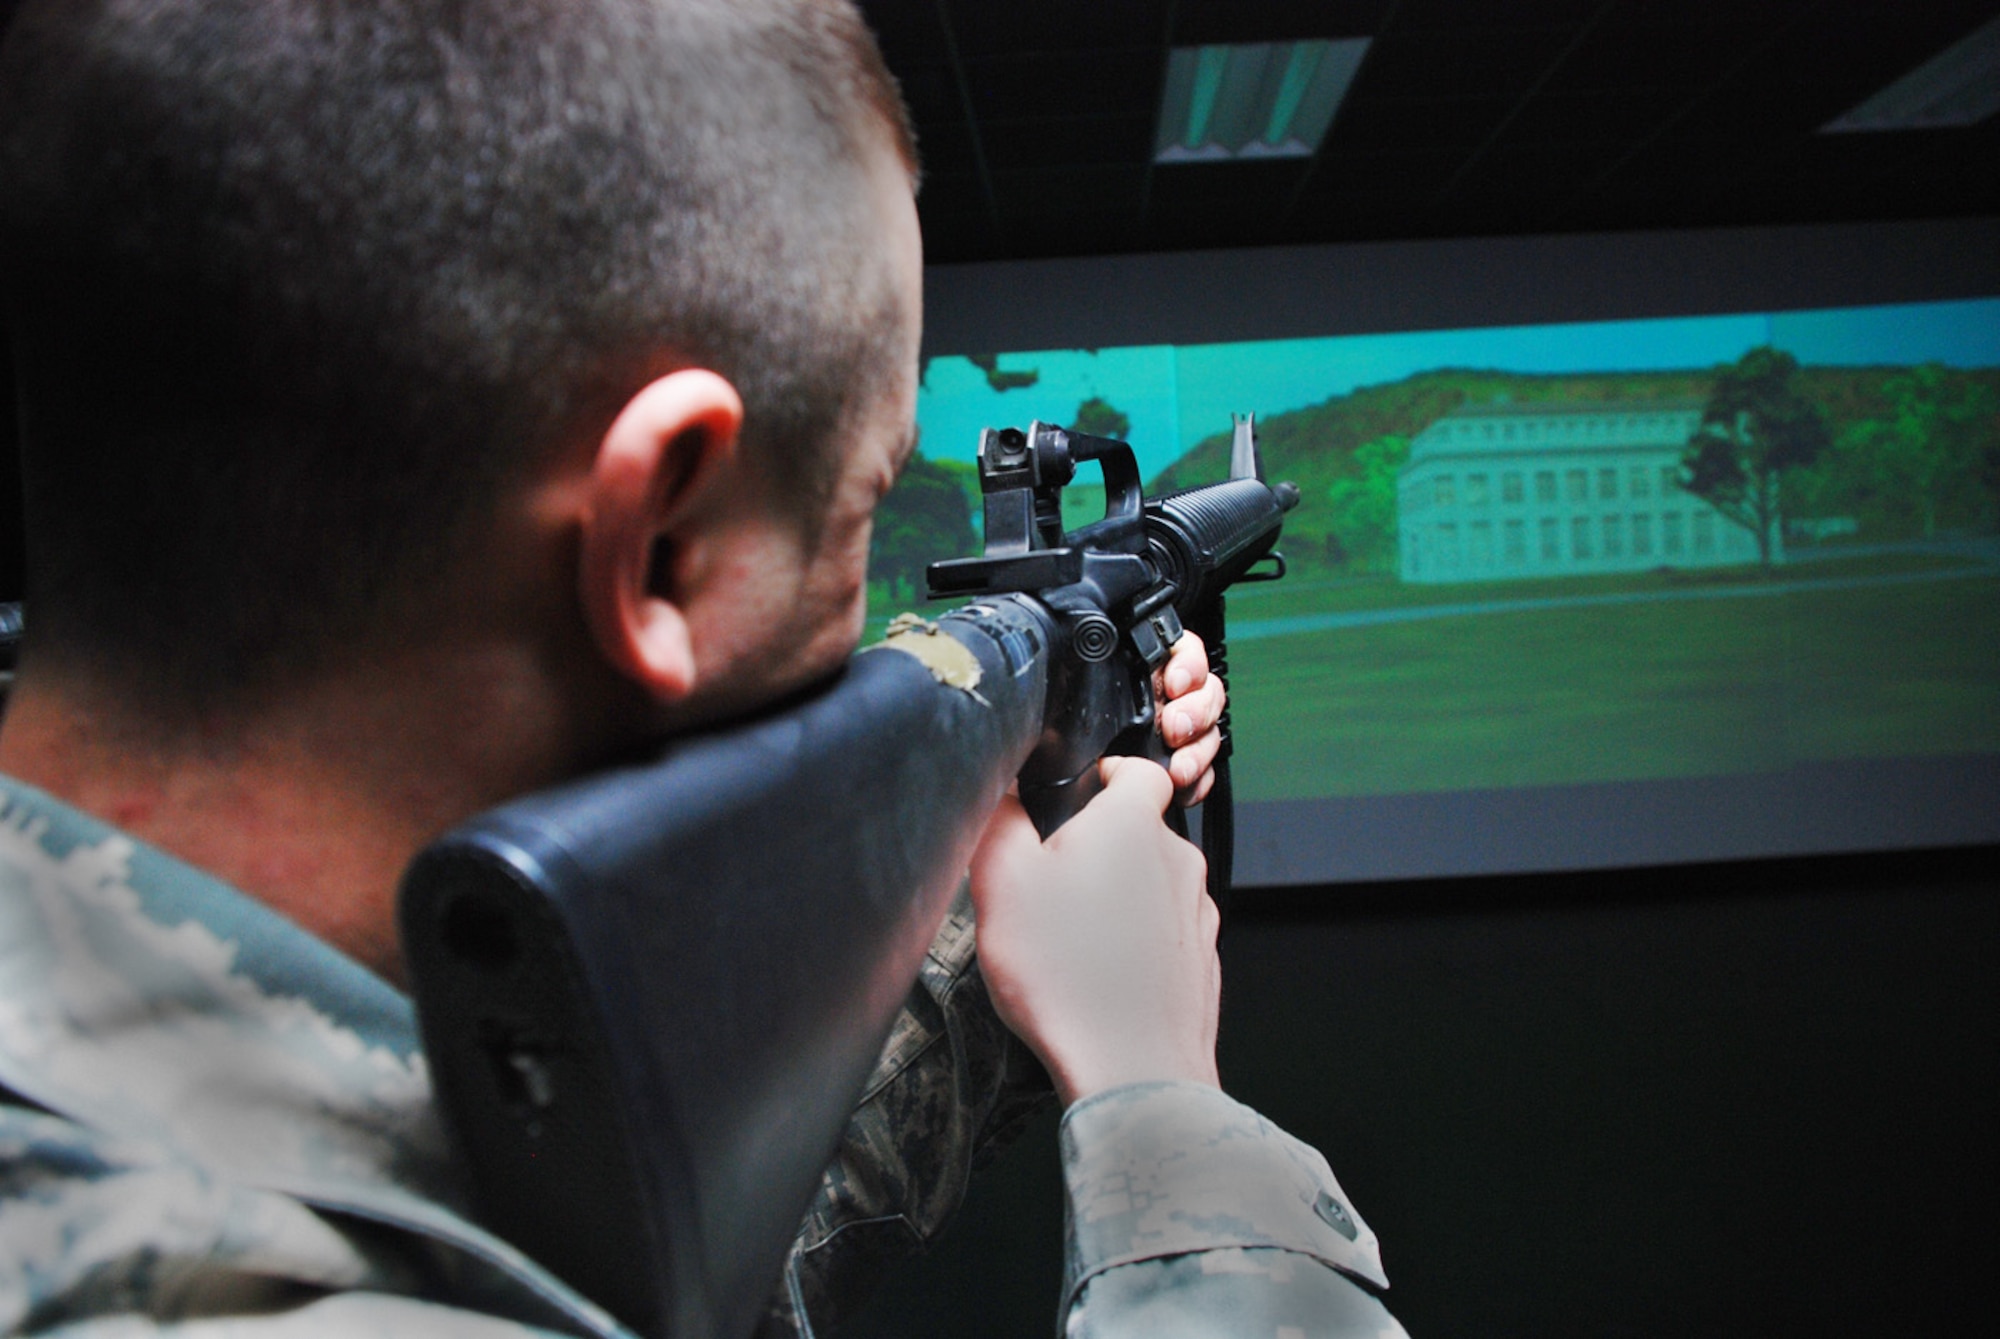 Airman 1st Class Brandon Blevins, 790th Missile Security Forces Squadron, searches for digital enemies near a building inside the base firearm training simulator March 10.